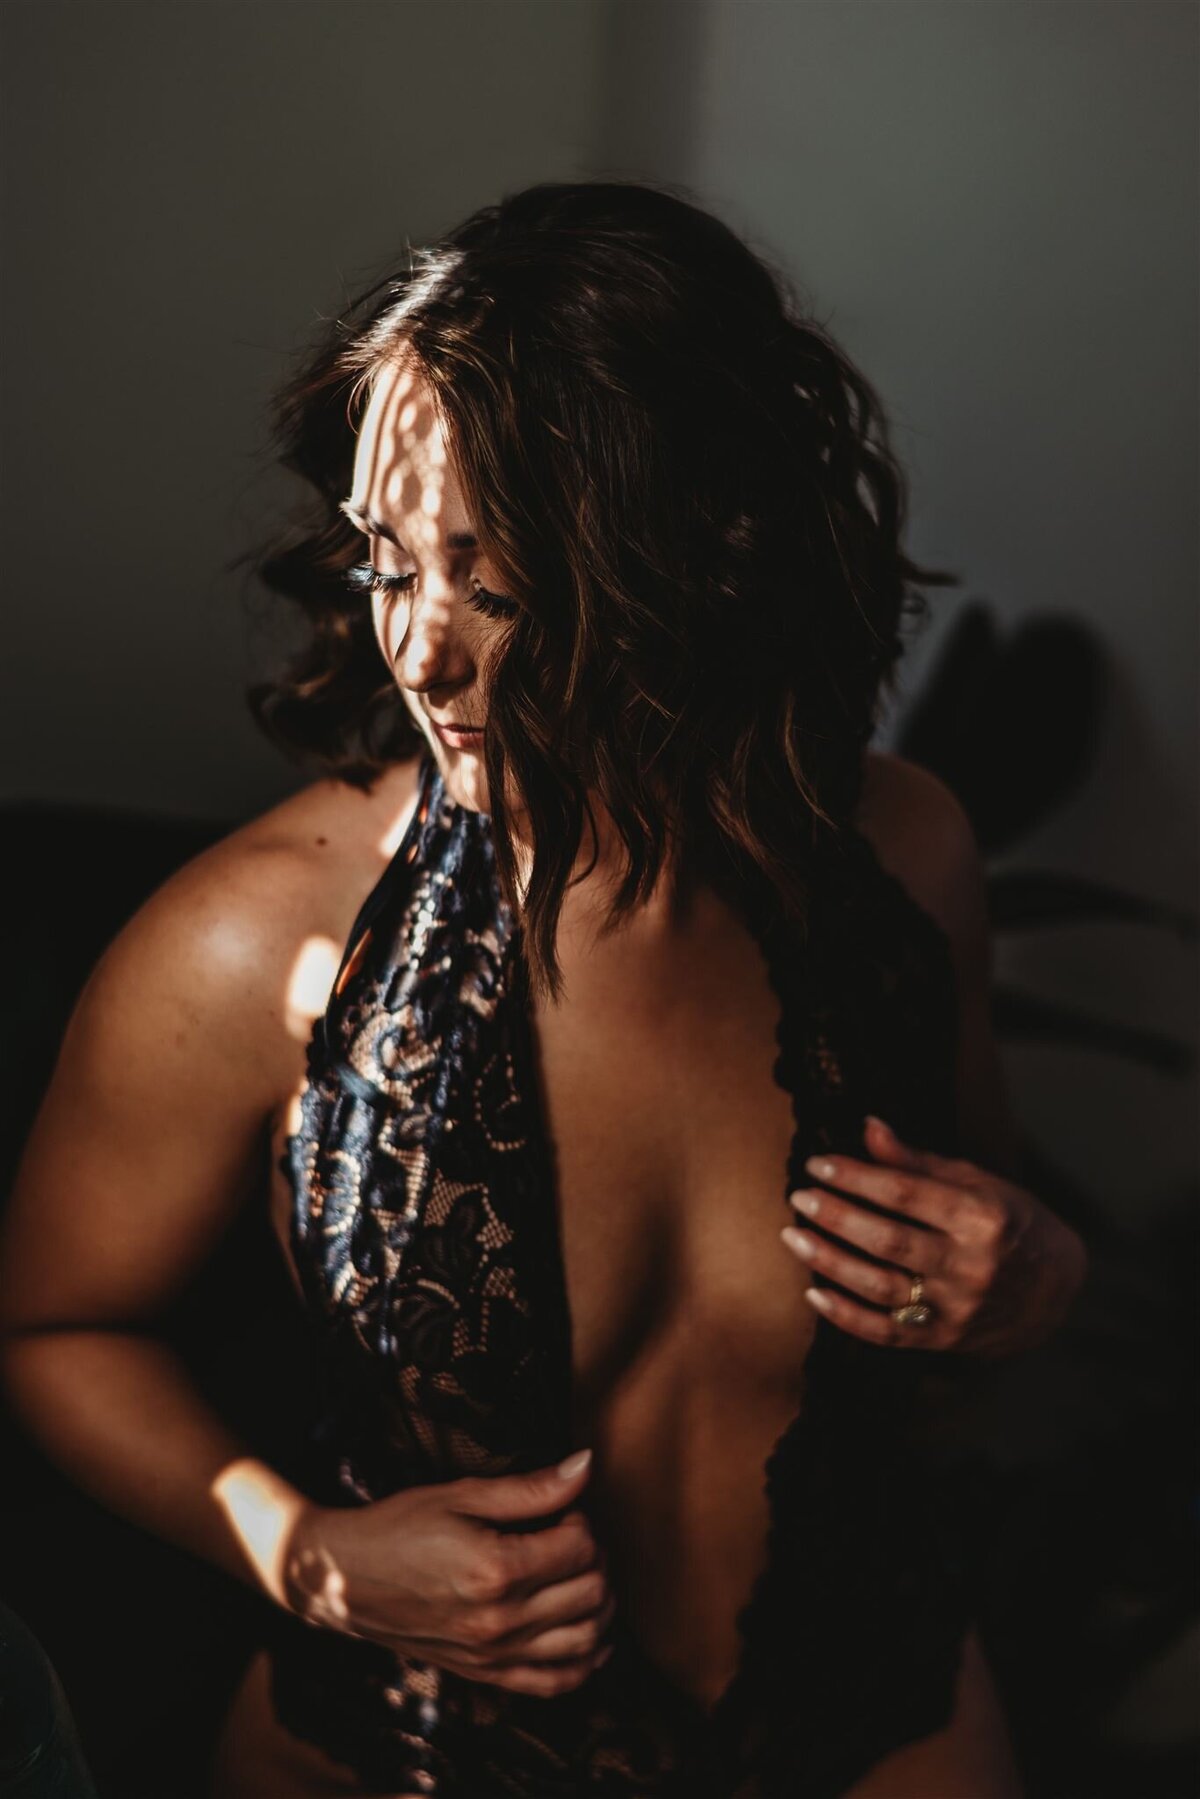 Baltimore photographers  captures boudoir pictures with woman in a one piece lingerie while holding her hands on her outfit while looking over her shoulder